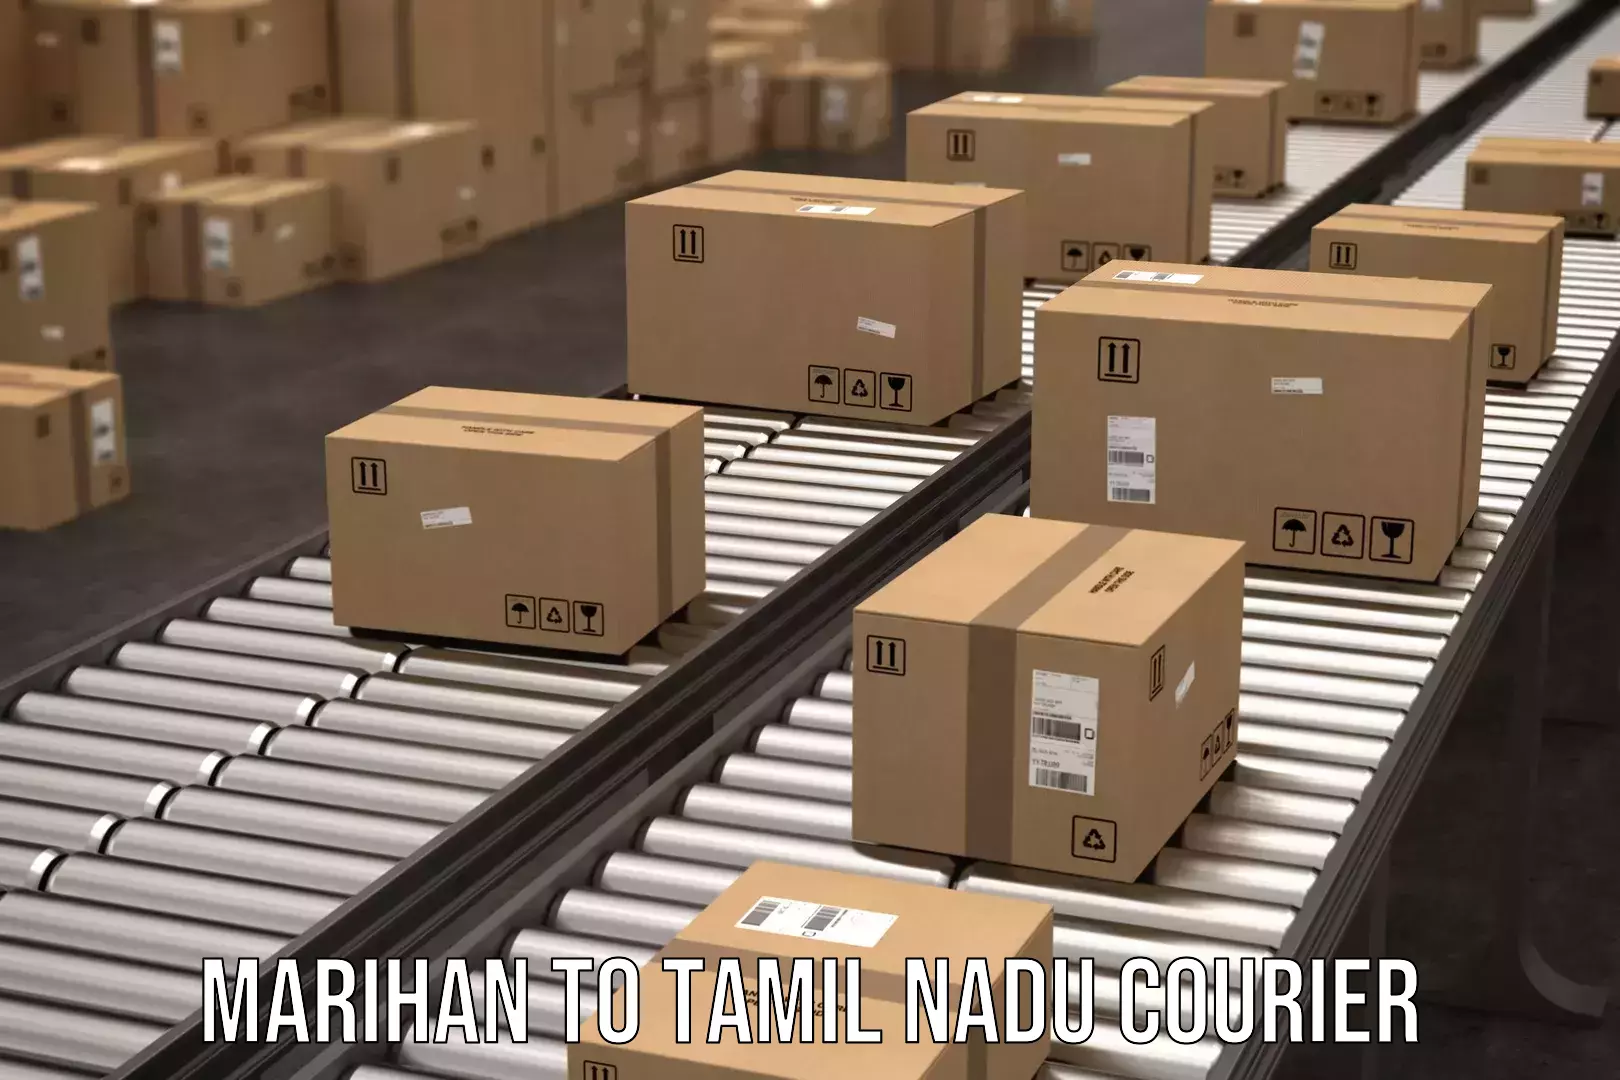 Speedy delivery service Marihan to Perambalur